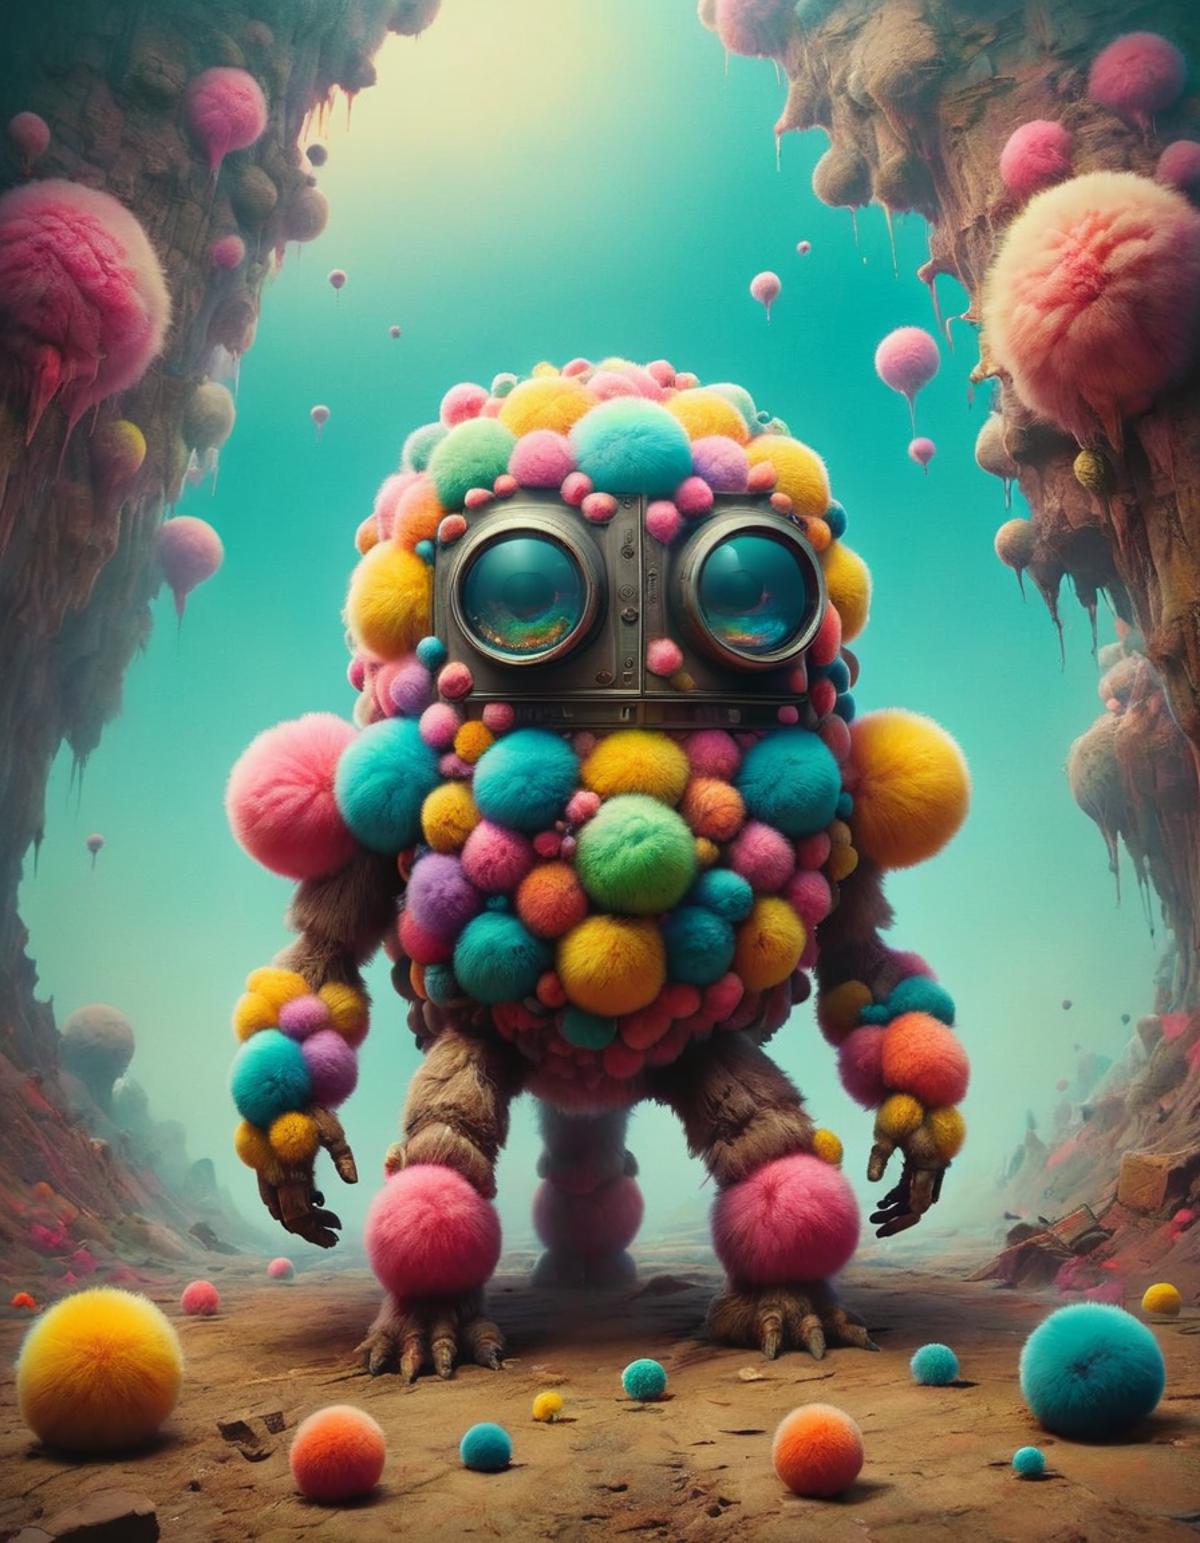 A colorful monster with a face and body made of different colored balls and yarn.